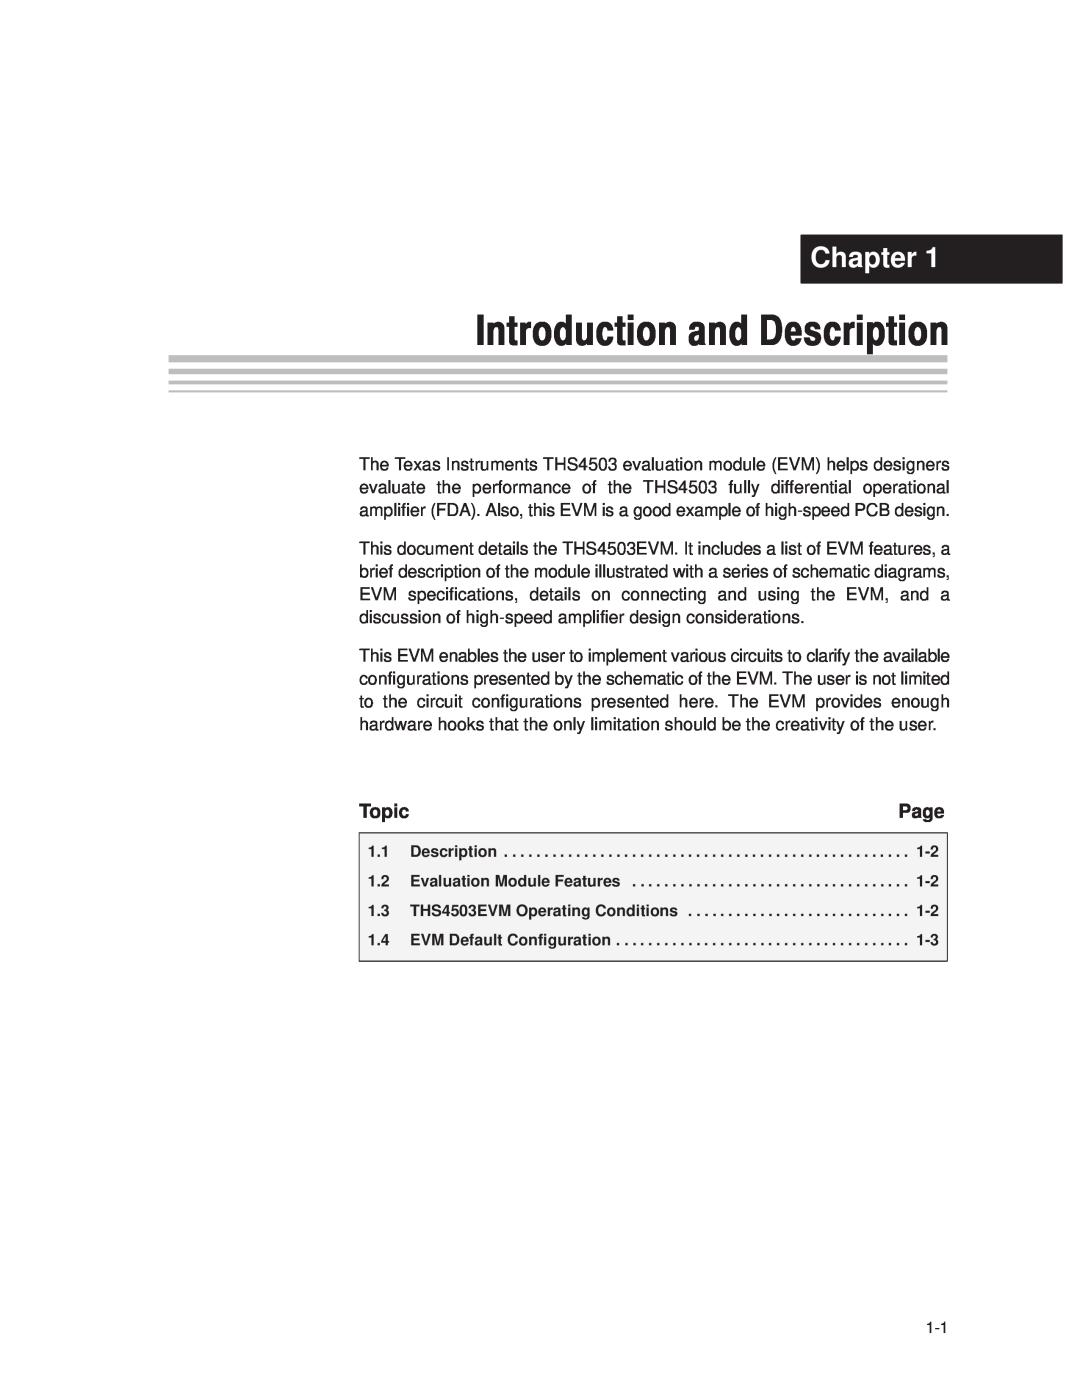 Texas Instruments THS4503EVM manual Chapter, Page, Topic 